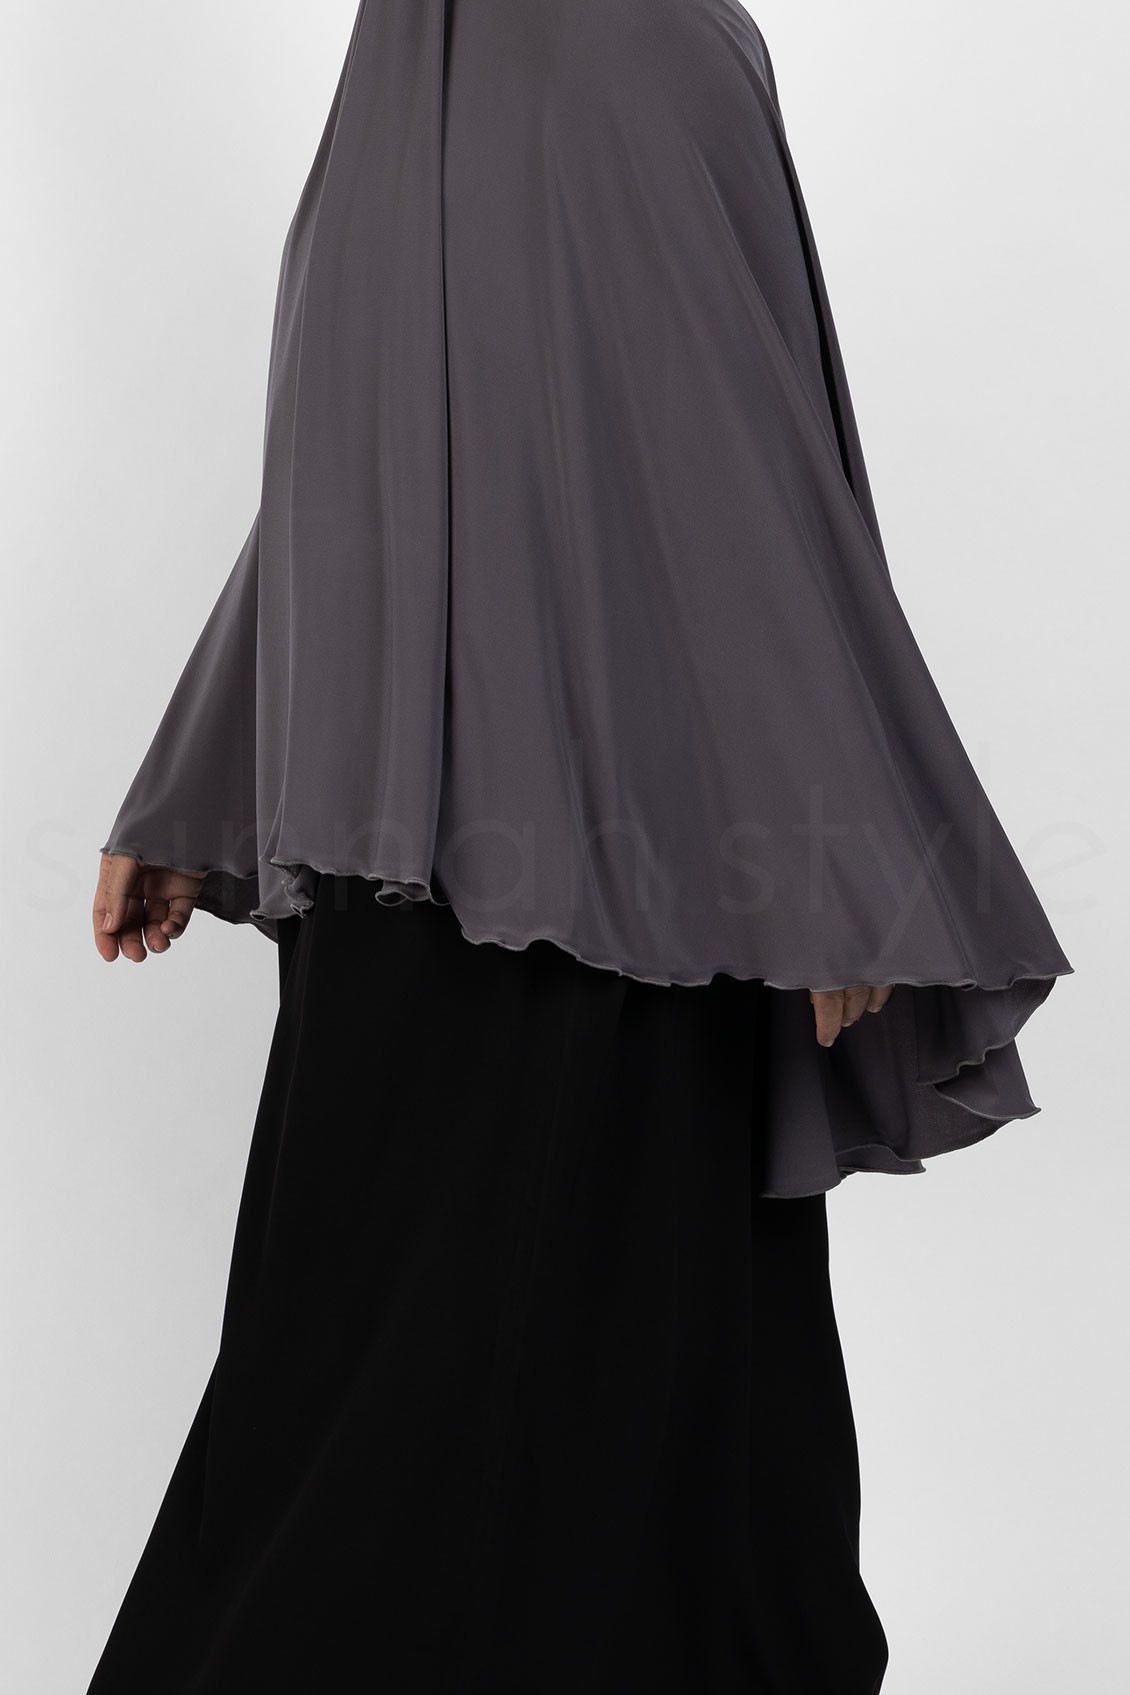 Sunnah Style Jersey Khimar Thigh Length Charcoal